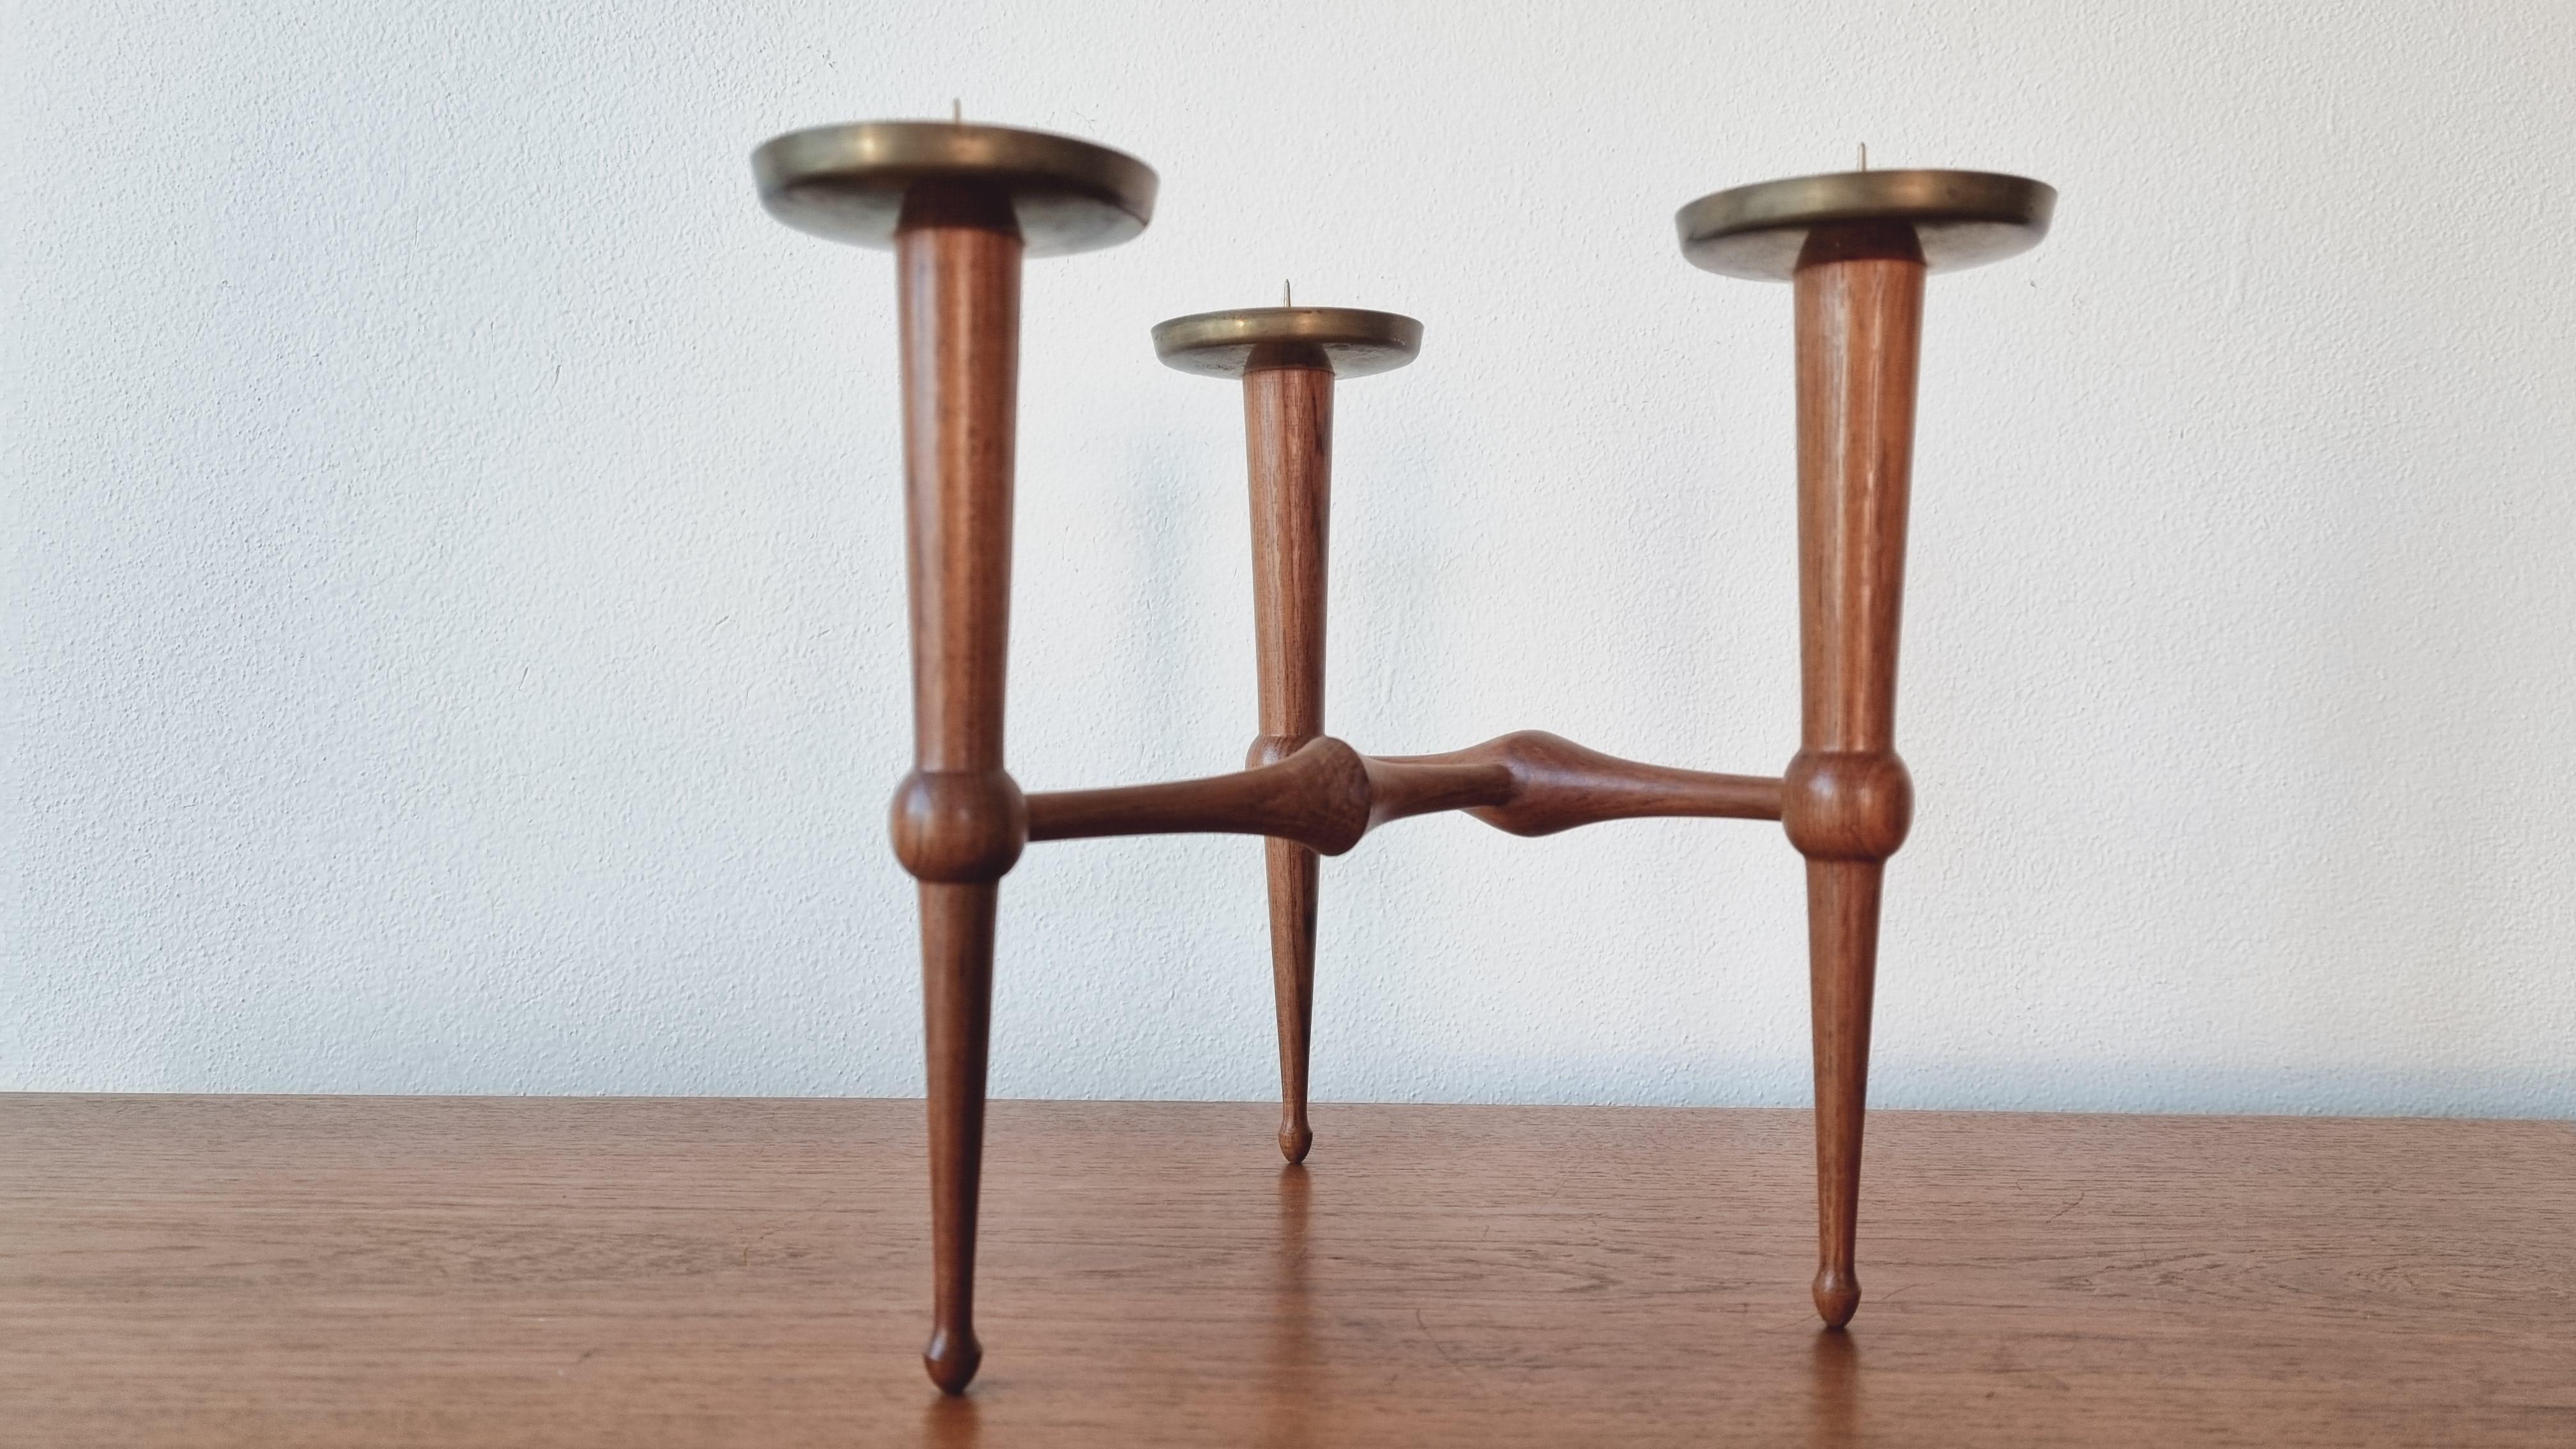 Midcentury Teak and Brass Rare Table Candle Holder / Stick, Denmark, 1960s In Excellent Condition For Sale In Praha, CZ